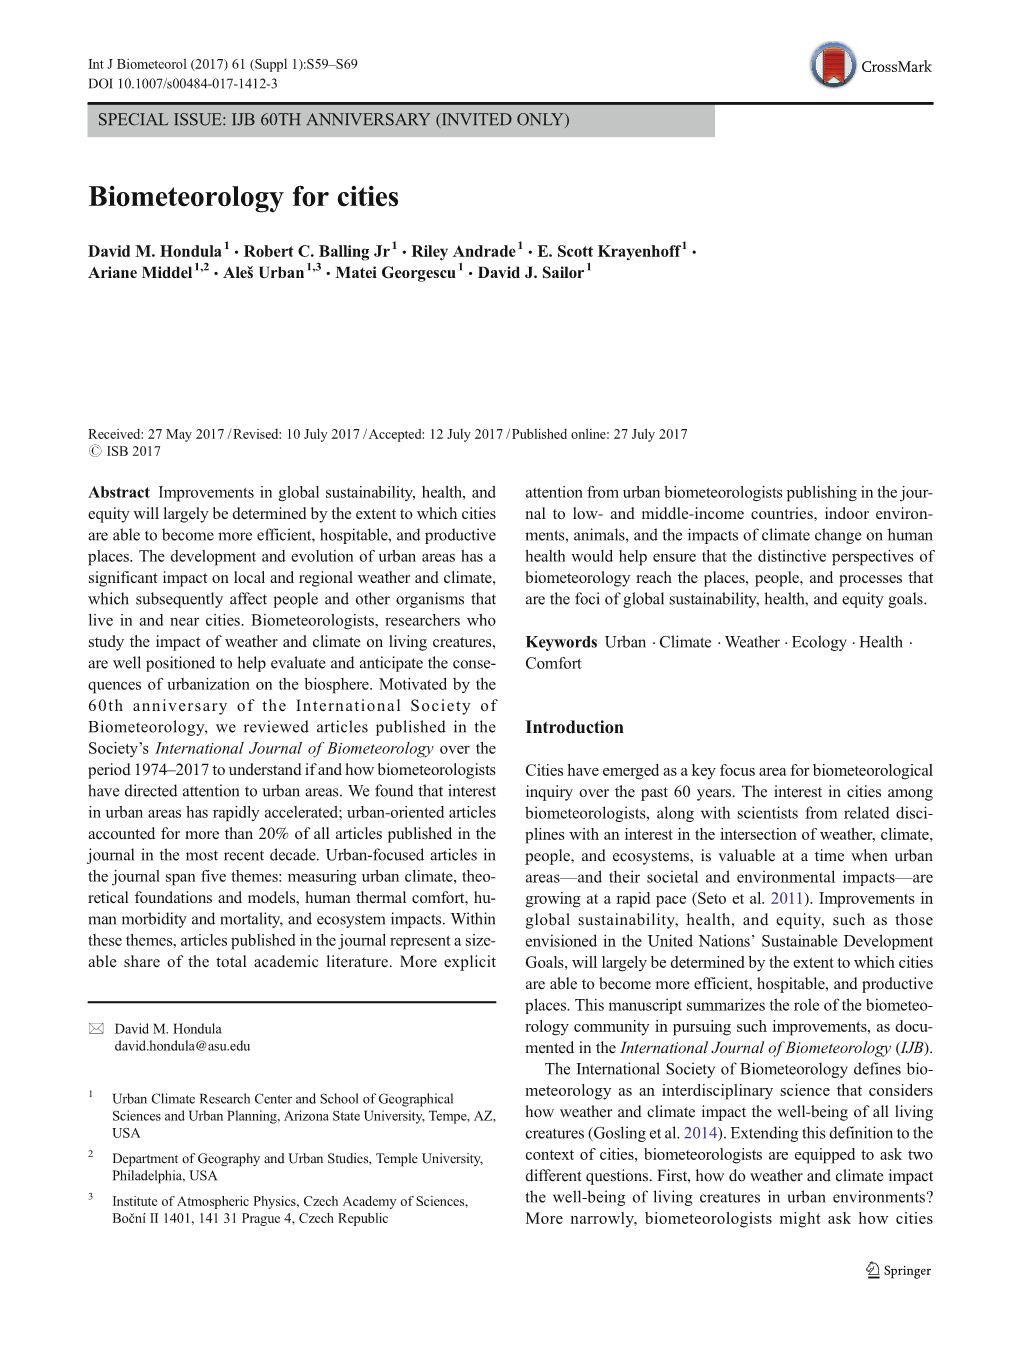 Biometeorology for Cities